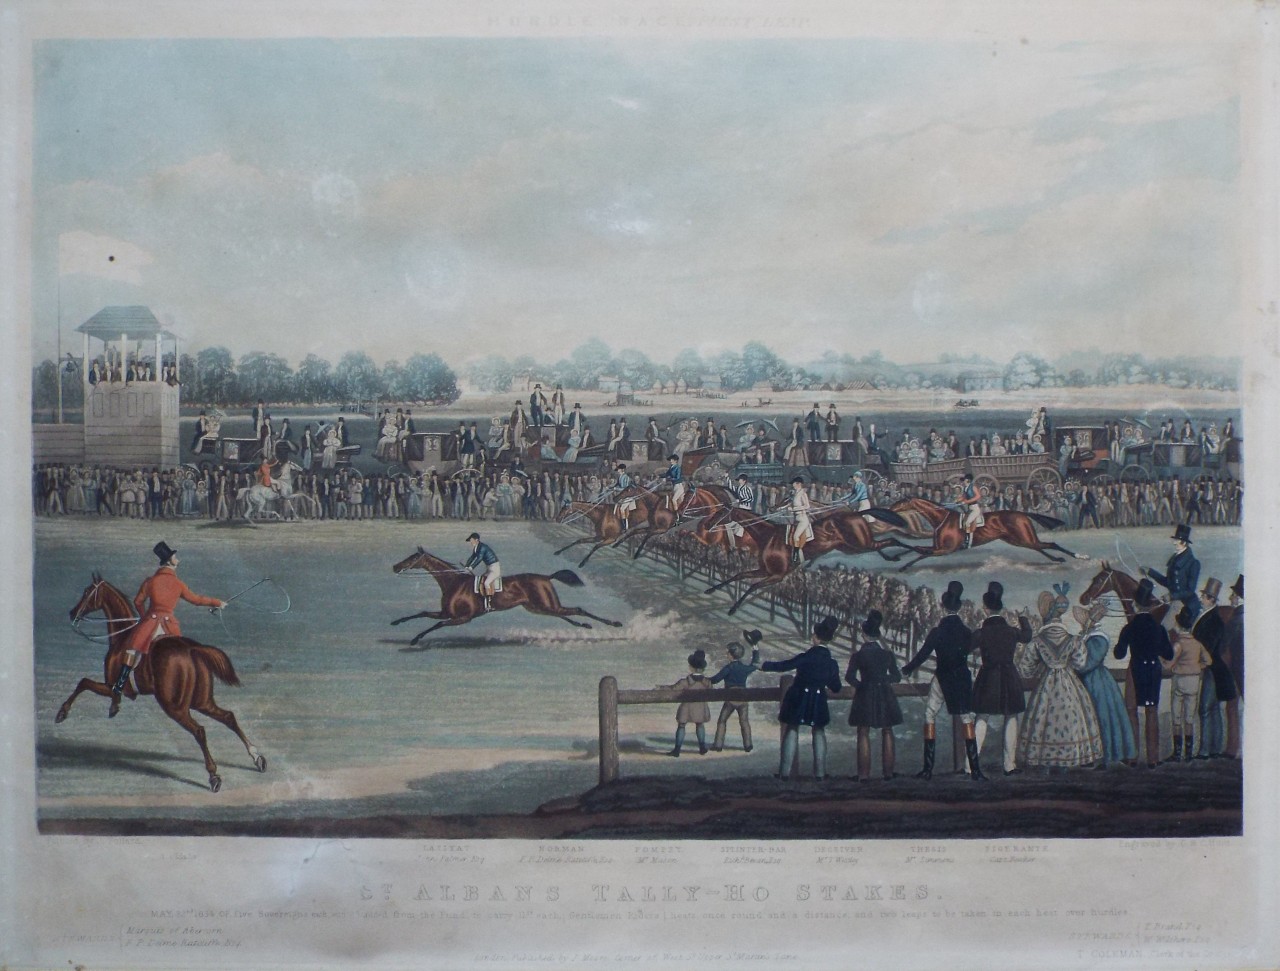 Aquatint - St. Albans Tally-Ho Stakes. Hurdle Race First Leap. - Hunt